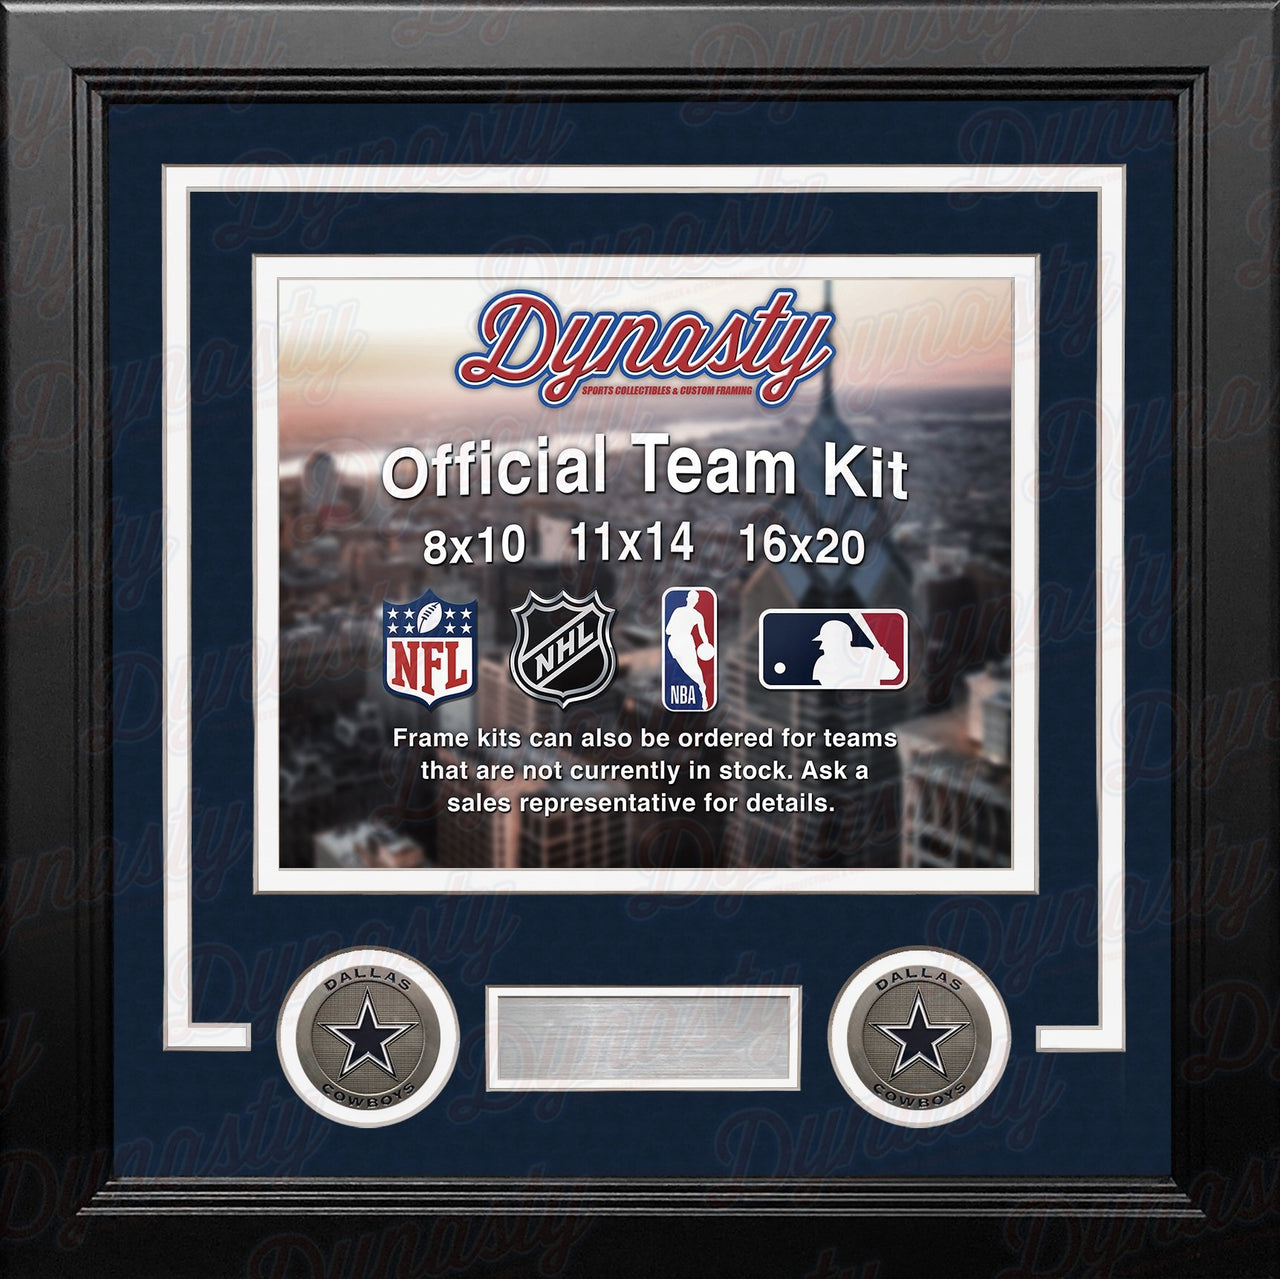 Dallas Cowboys Custom NFL Football 16x20 Picture Frame Kit (Multiple Colors) - Dynasty Sports & Framing 